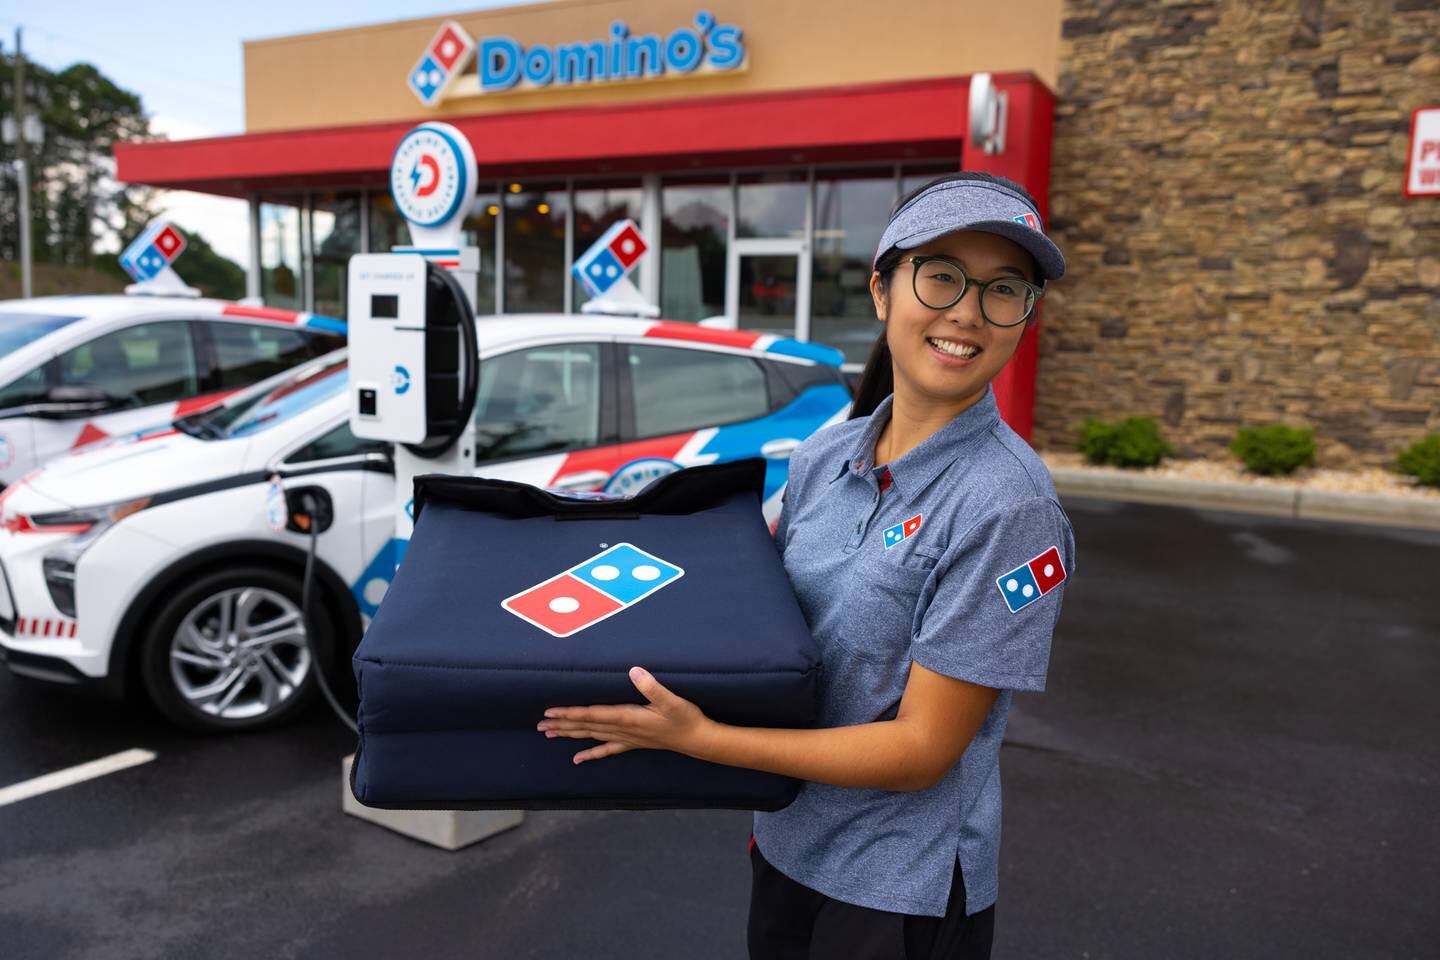 Domino's ordered more than 800 Chevy Bolt EVs to deliver its pizza products across the US. Photo: Domino's